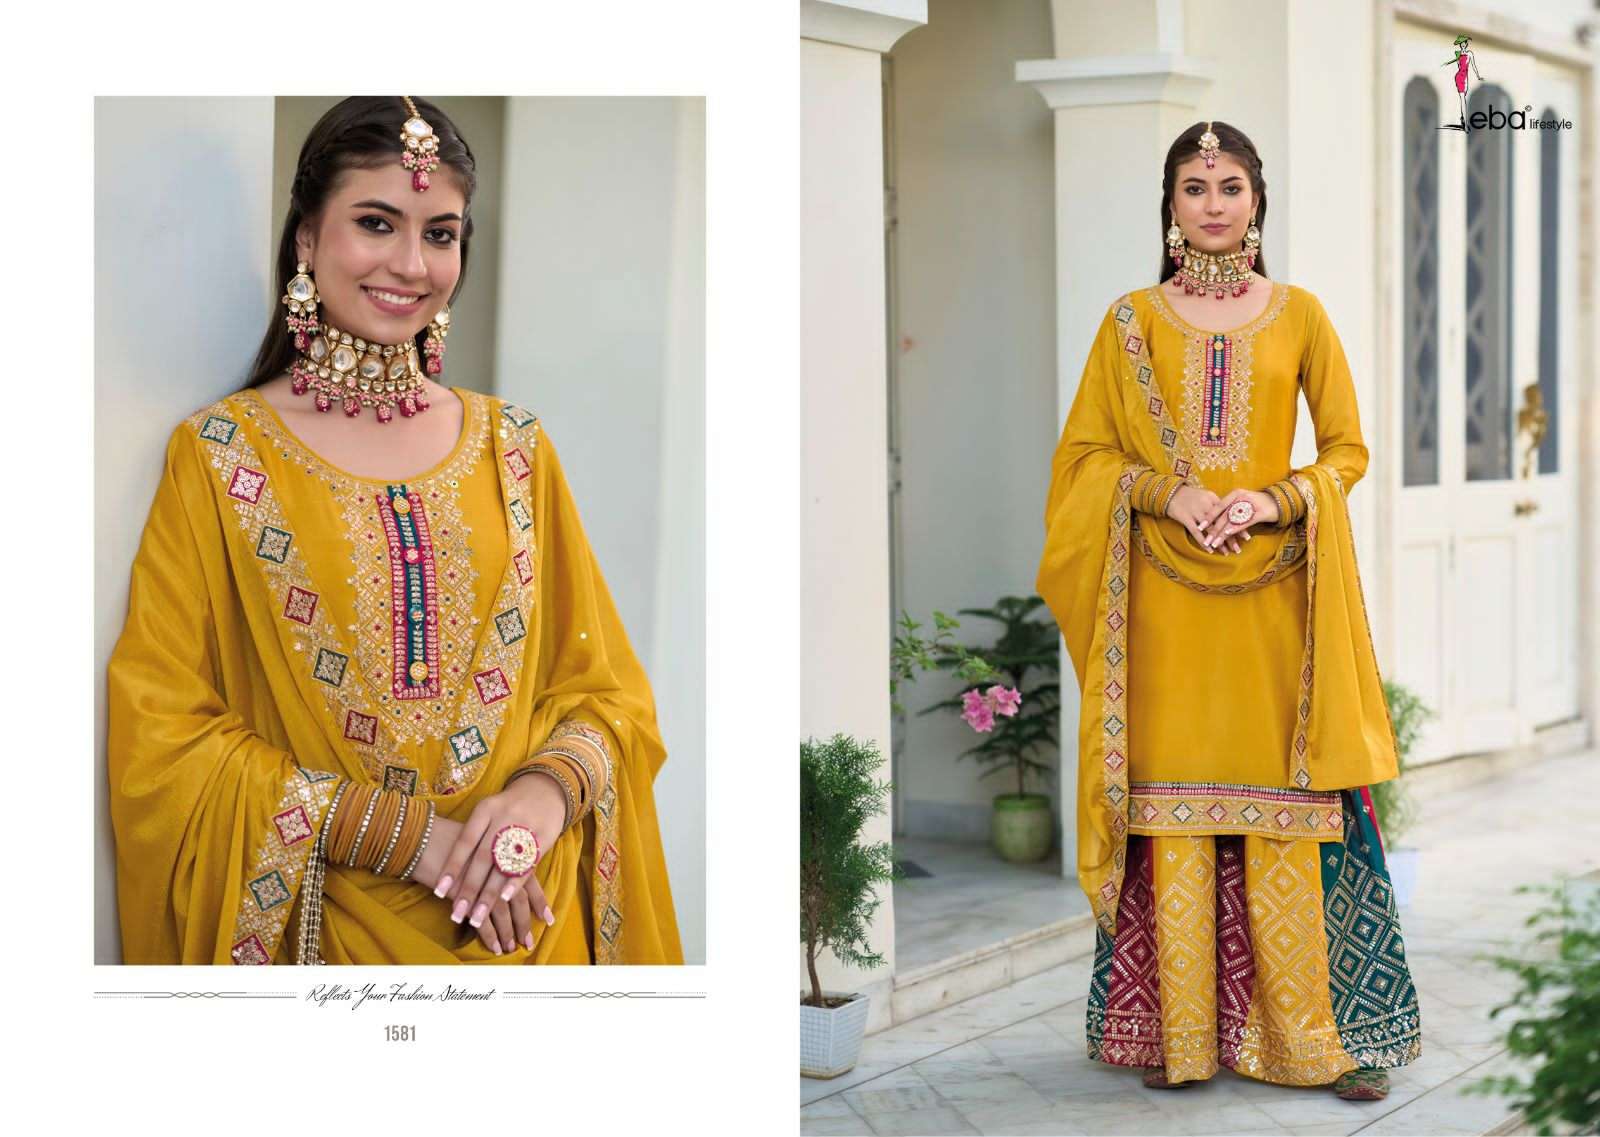 EBA LIFESTYLE PRESENTS SAFROON VOL 3 CHINON WITH EMBROIDERY WHOLESALE SALWAR KAMEEZ